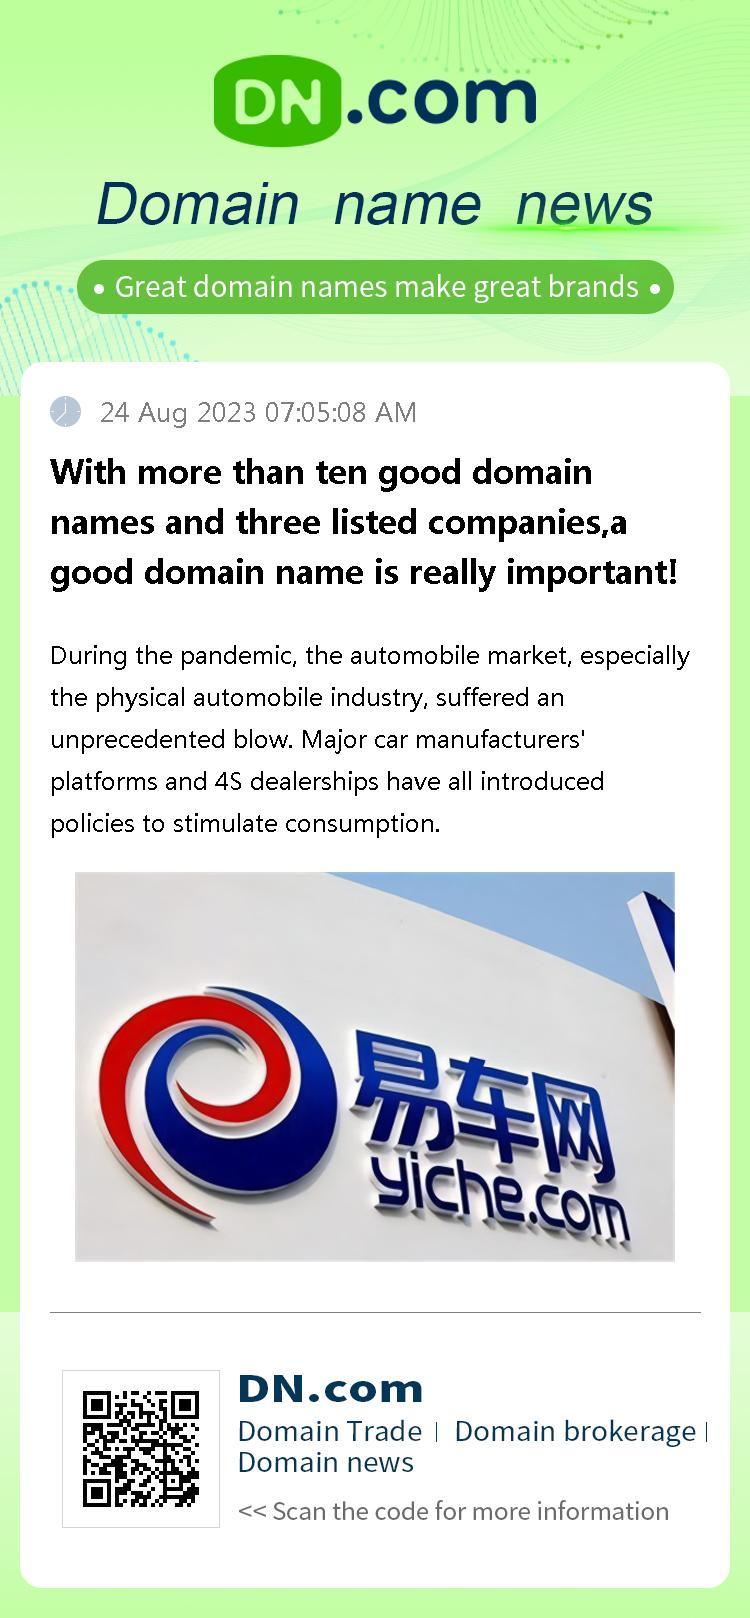 With more than ten good domain names and three listed companies,a good domain name is really important!